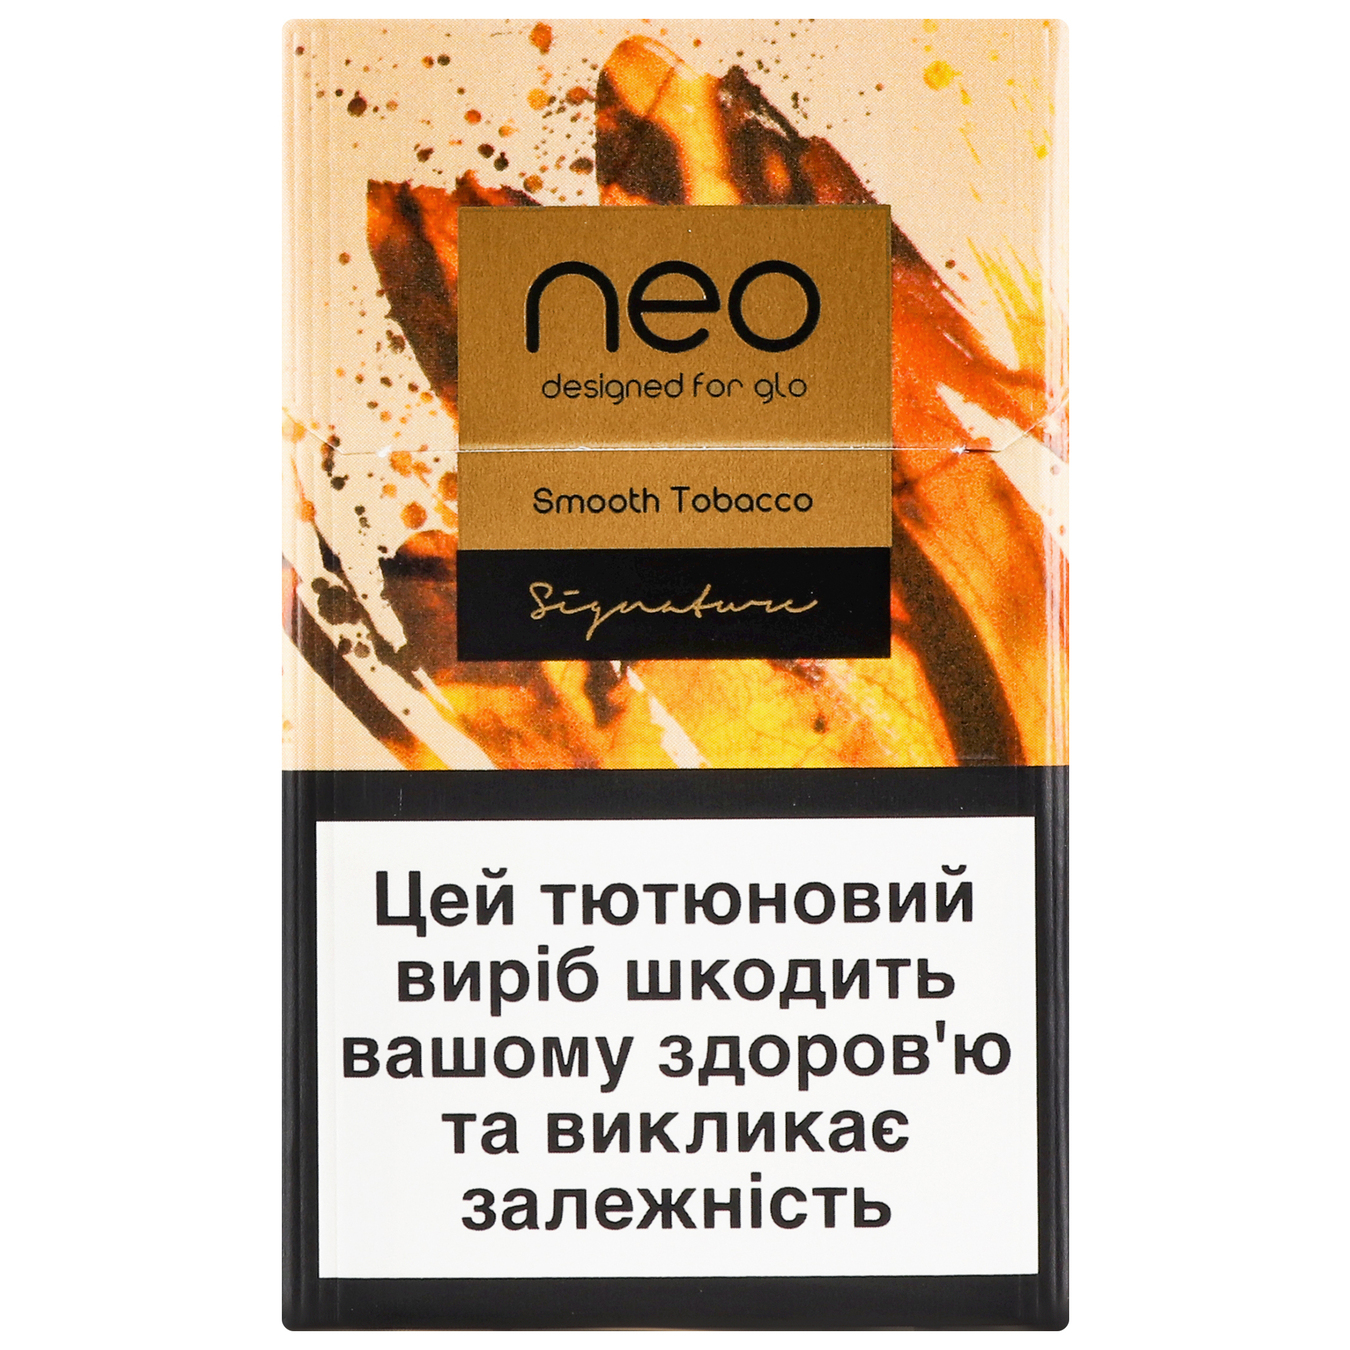 Sticks Neo Demi Smooth Tobbaco tobacco-containing 20pcs (the price is indicated without excise tax)